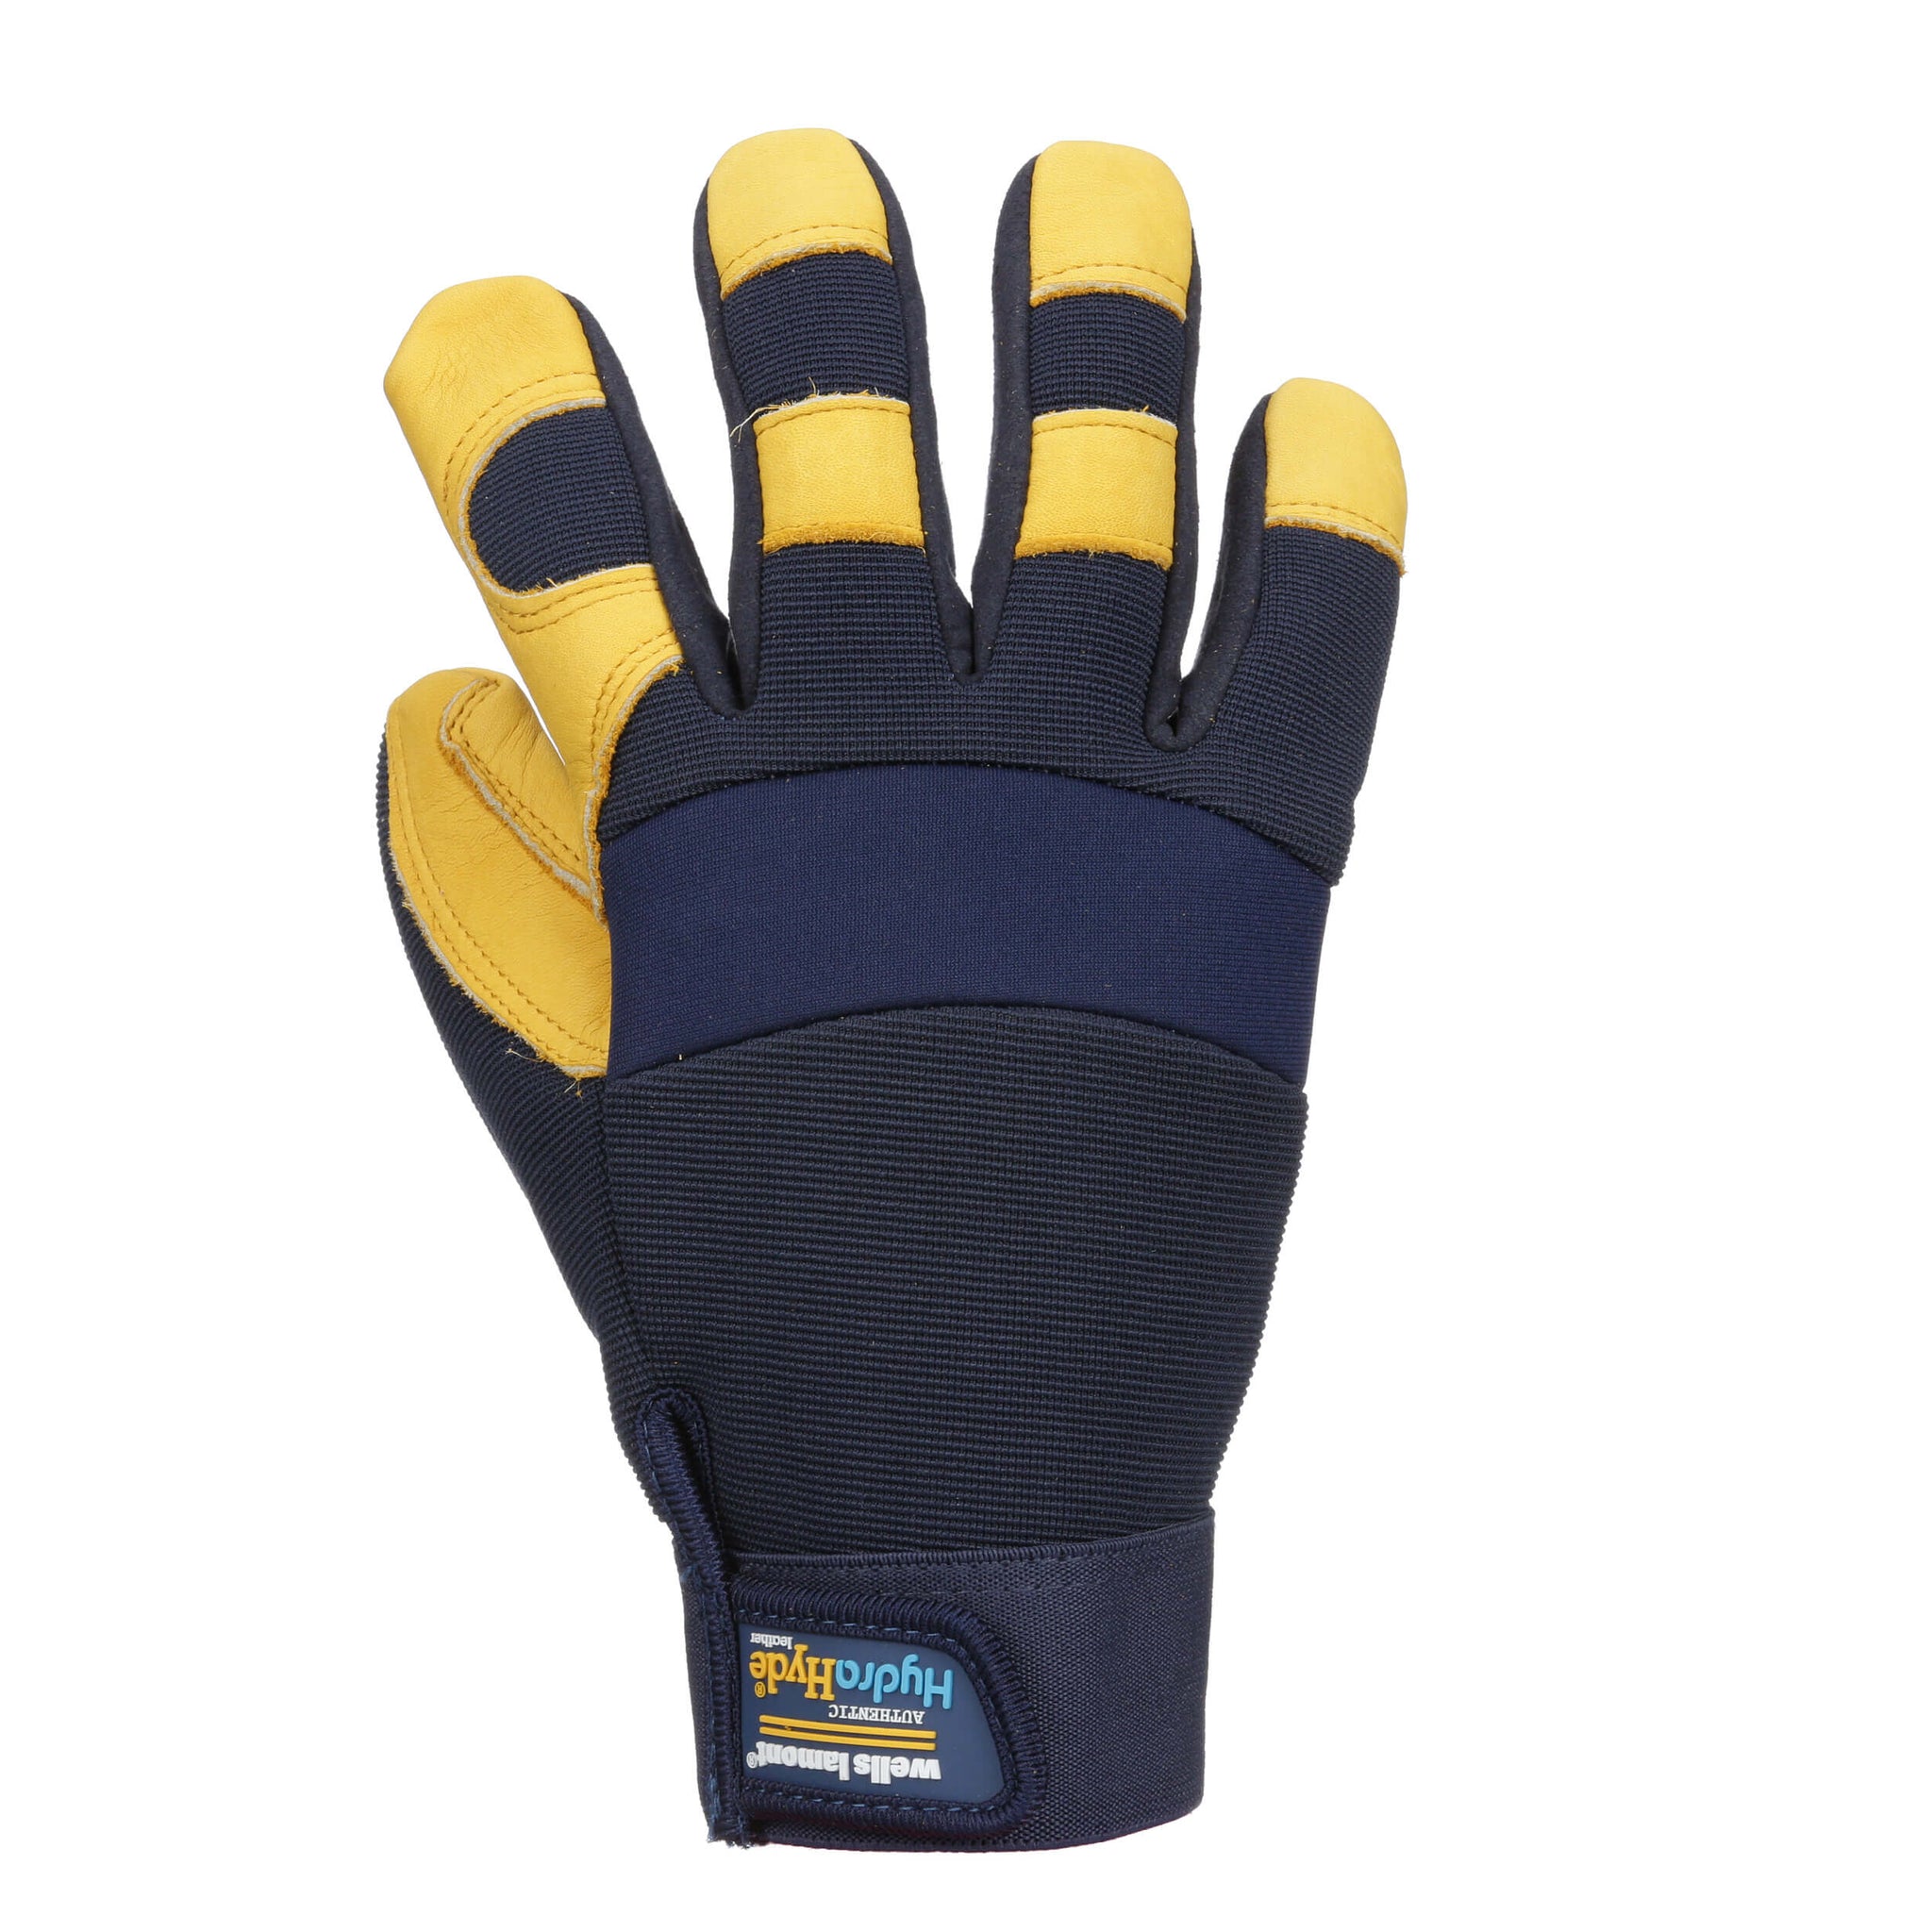 Wells Lamont Men's HydraHyde Leather Water-Resistant Work Gloves